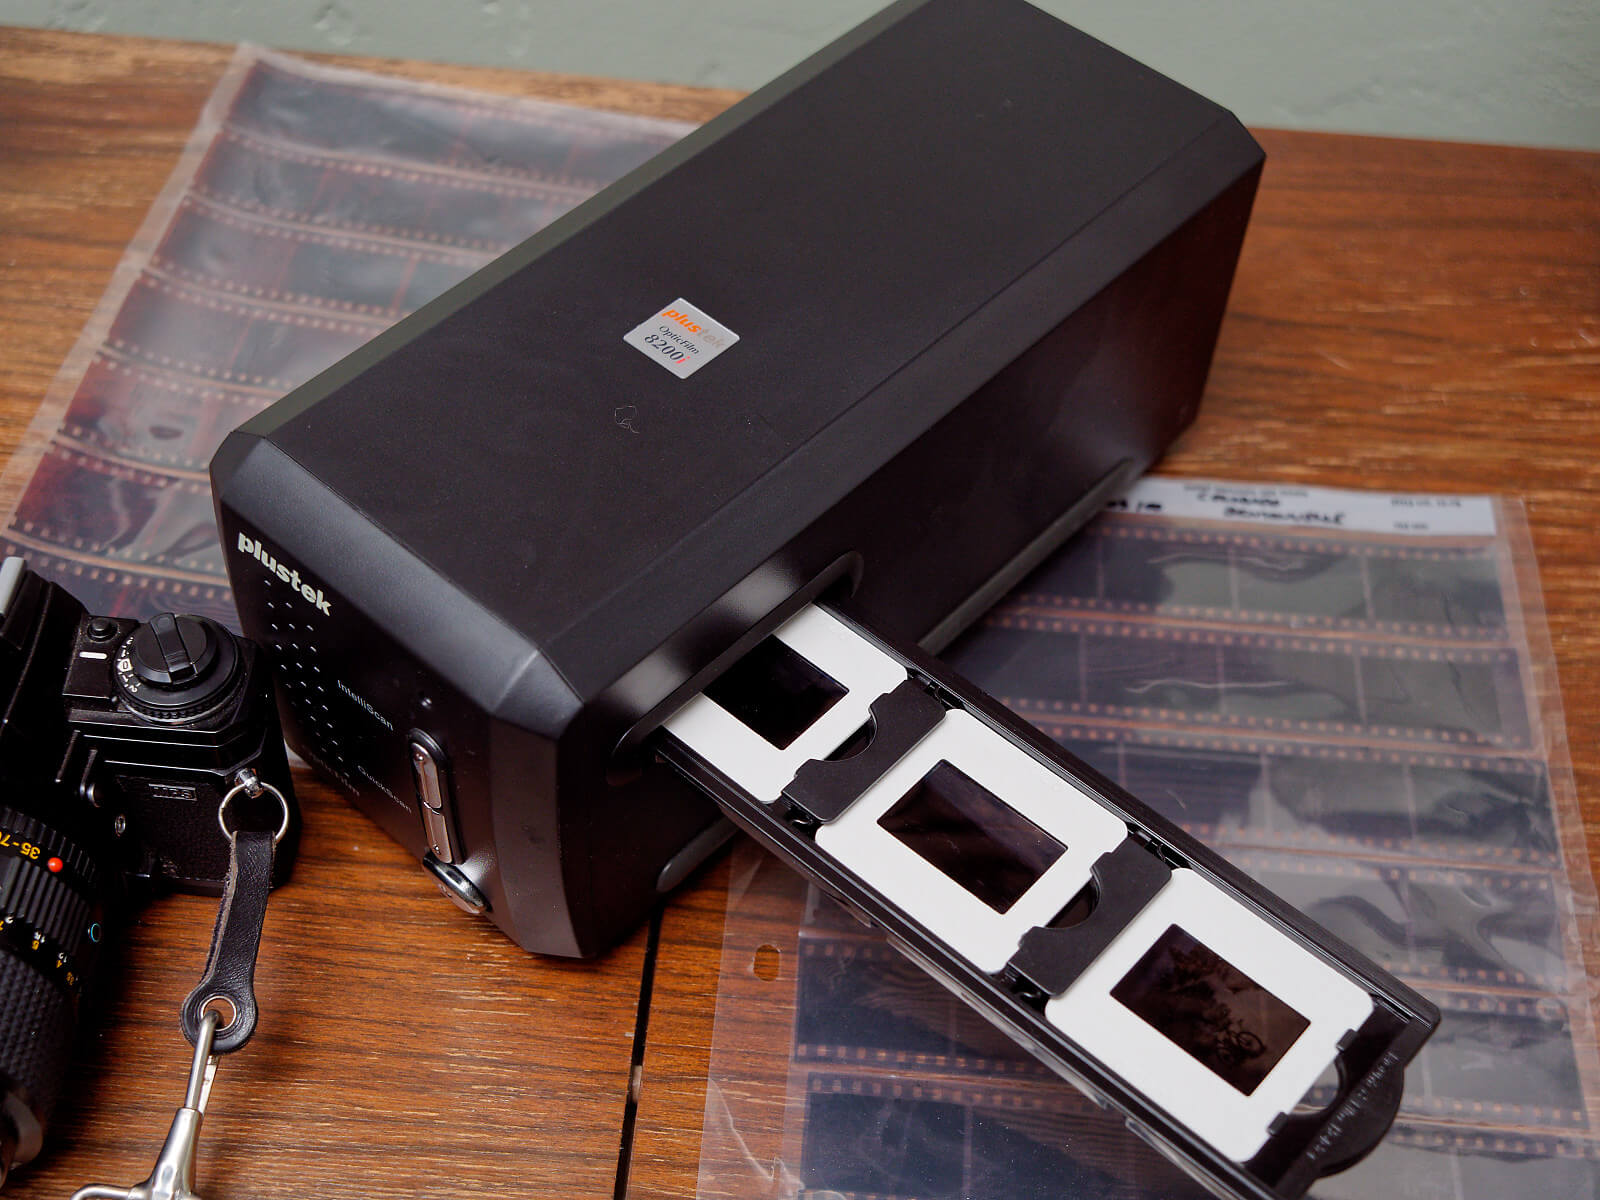 Plustek Opticfilm 8200I Ai Film Scanner Review: Love at First Scan